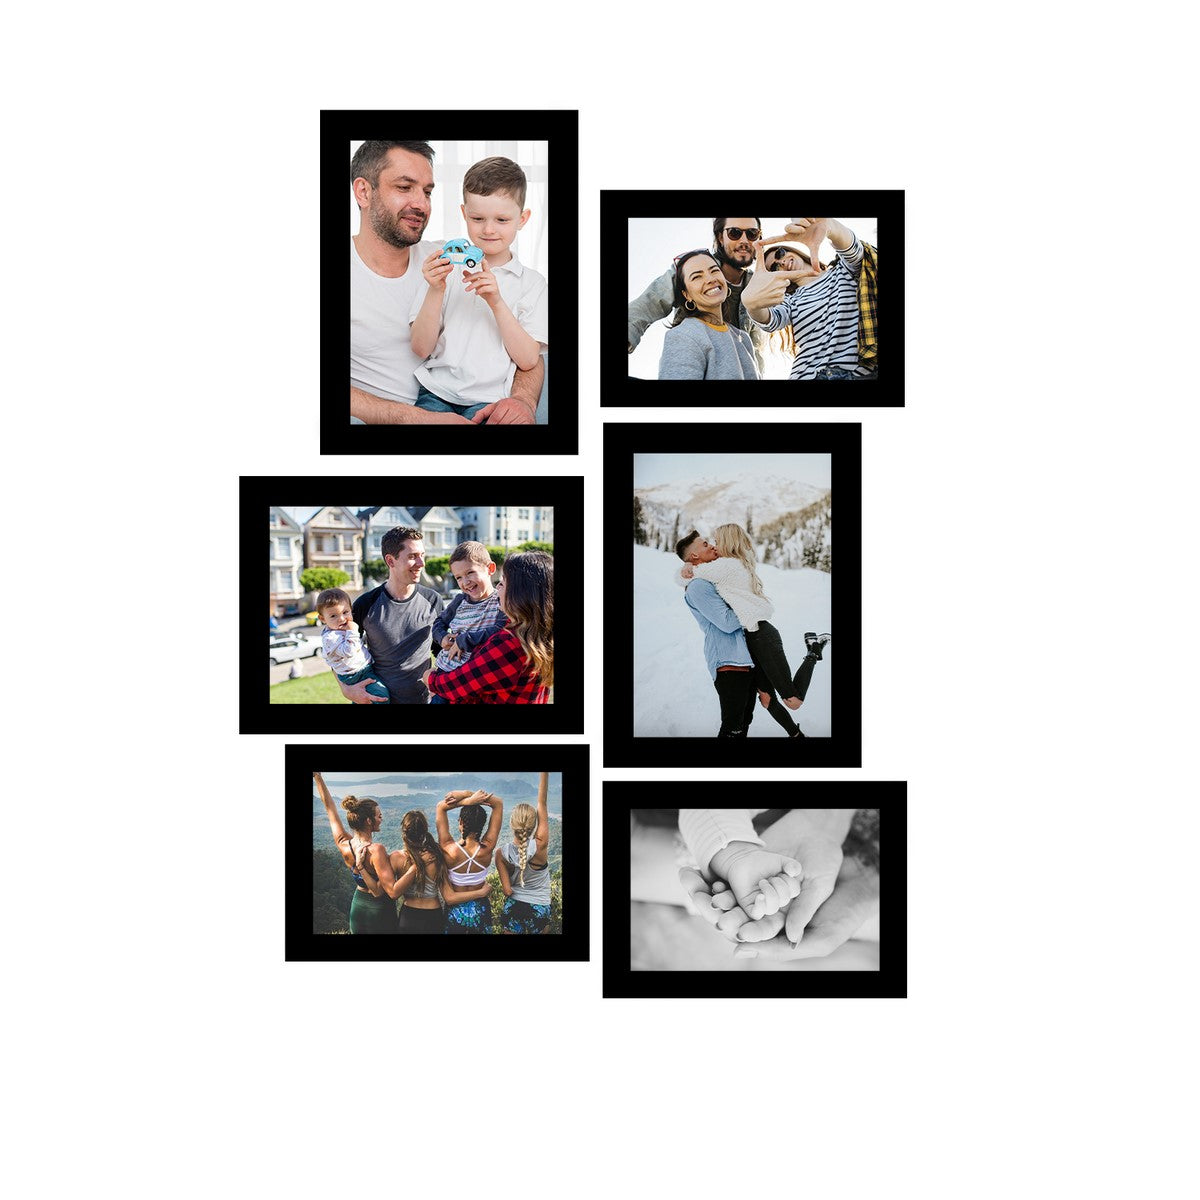 Memory Wall Collage Photo Frame - Set of 6 Photo Frames for 3 Photos of 5"x7", 3 Photos of 6"x8"